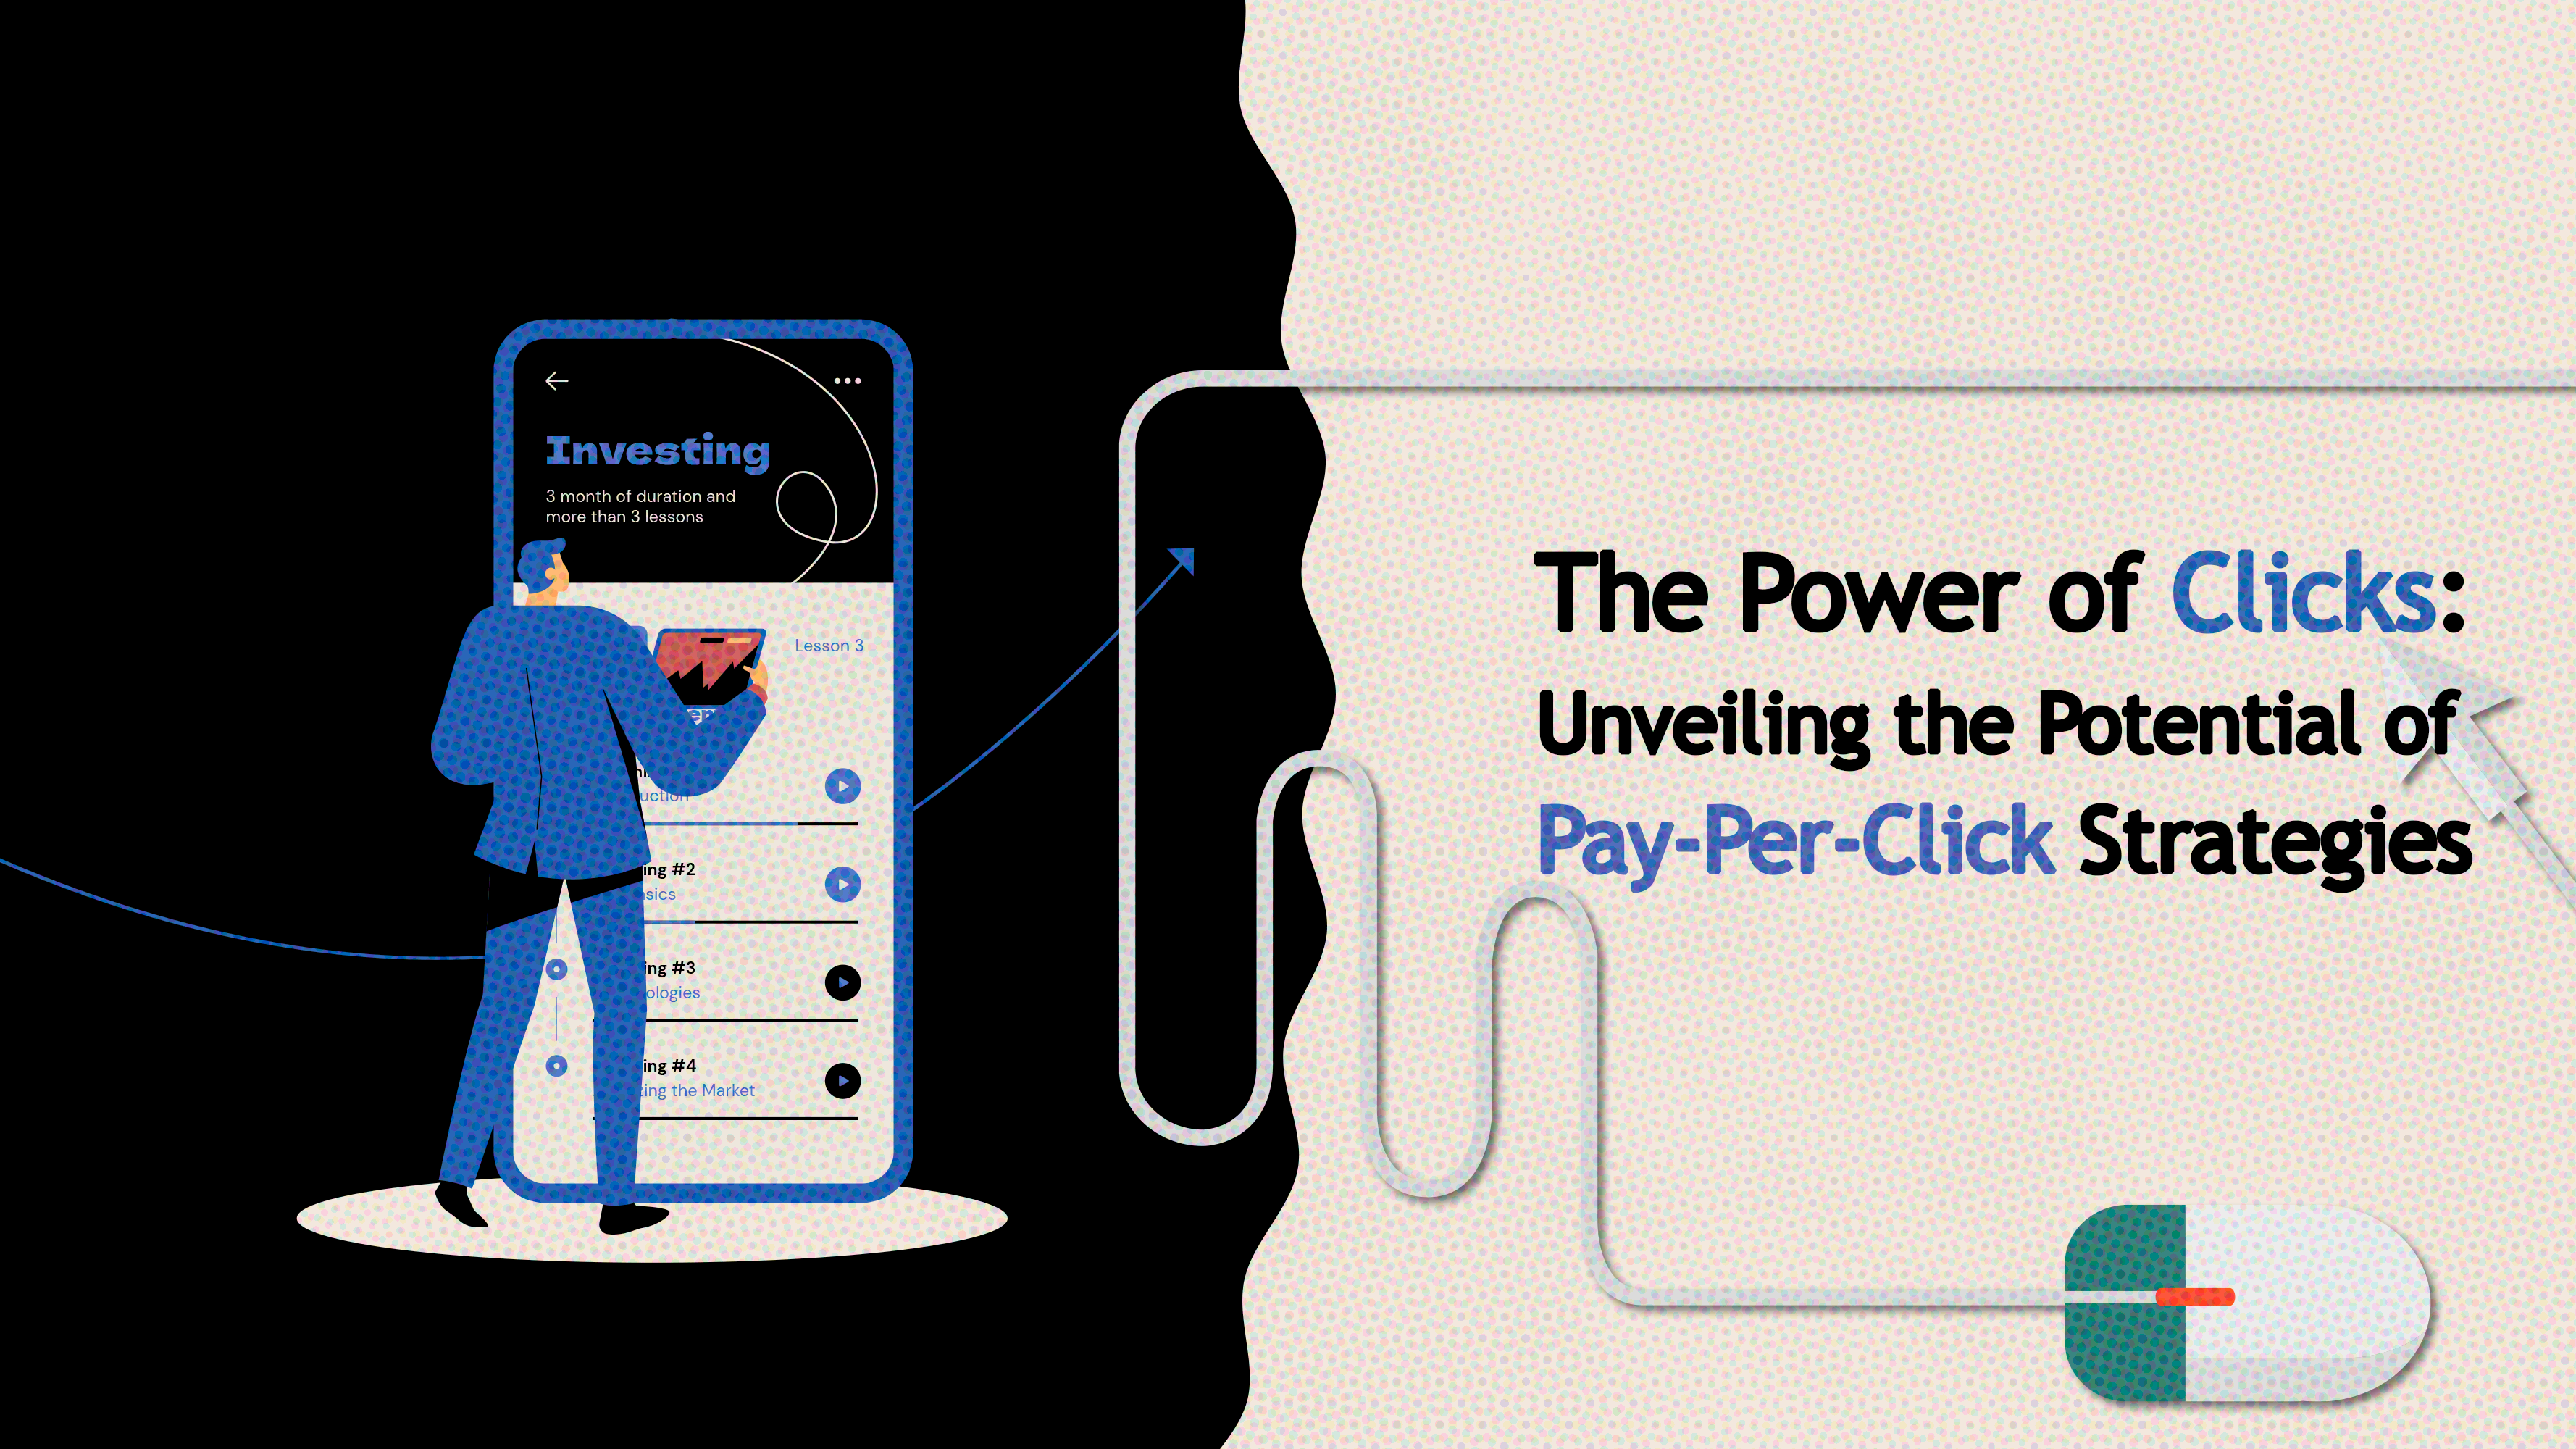 The Power of Clicks: Unveiling the Potential of Pay-Per-Click Strategies